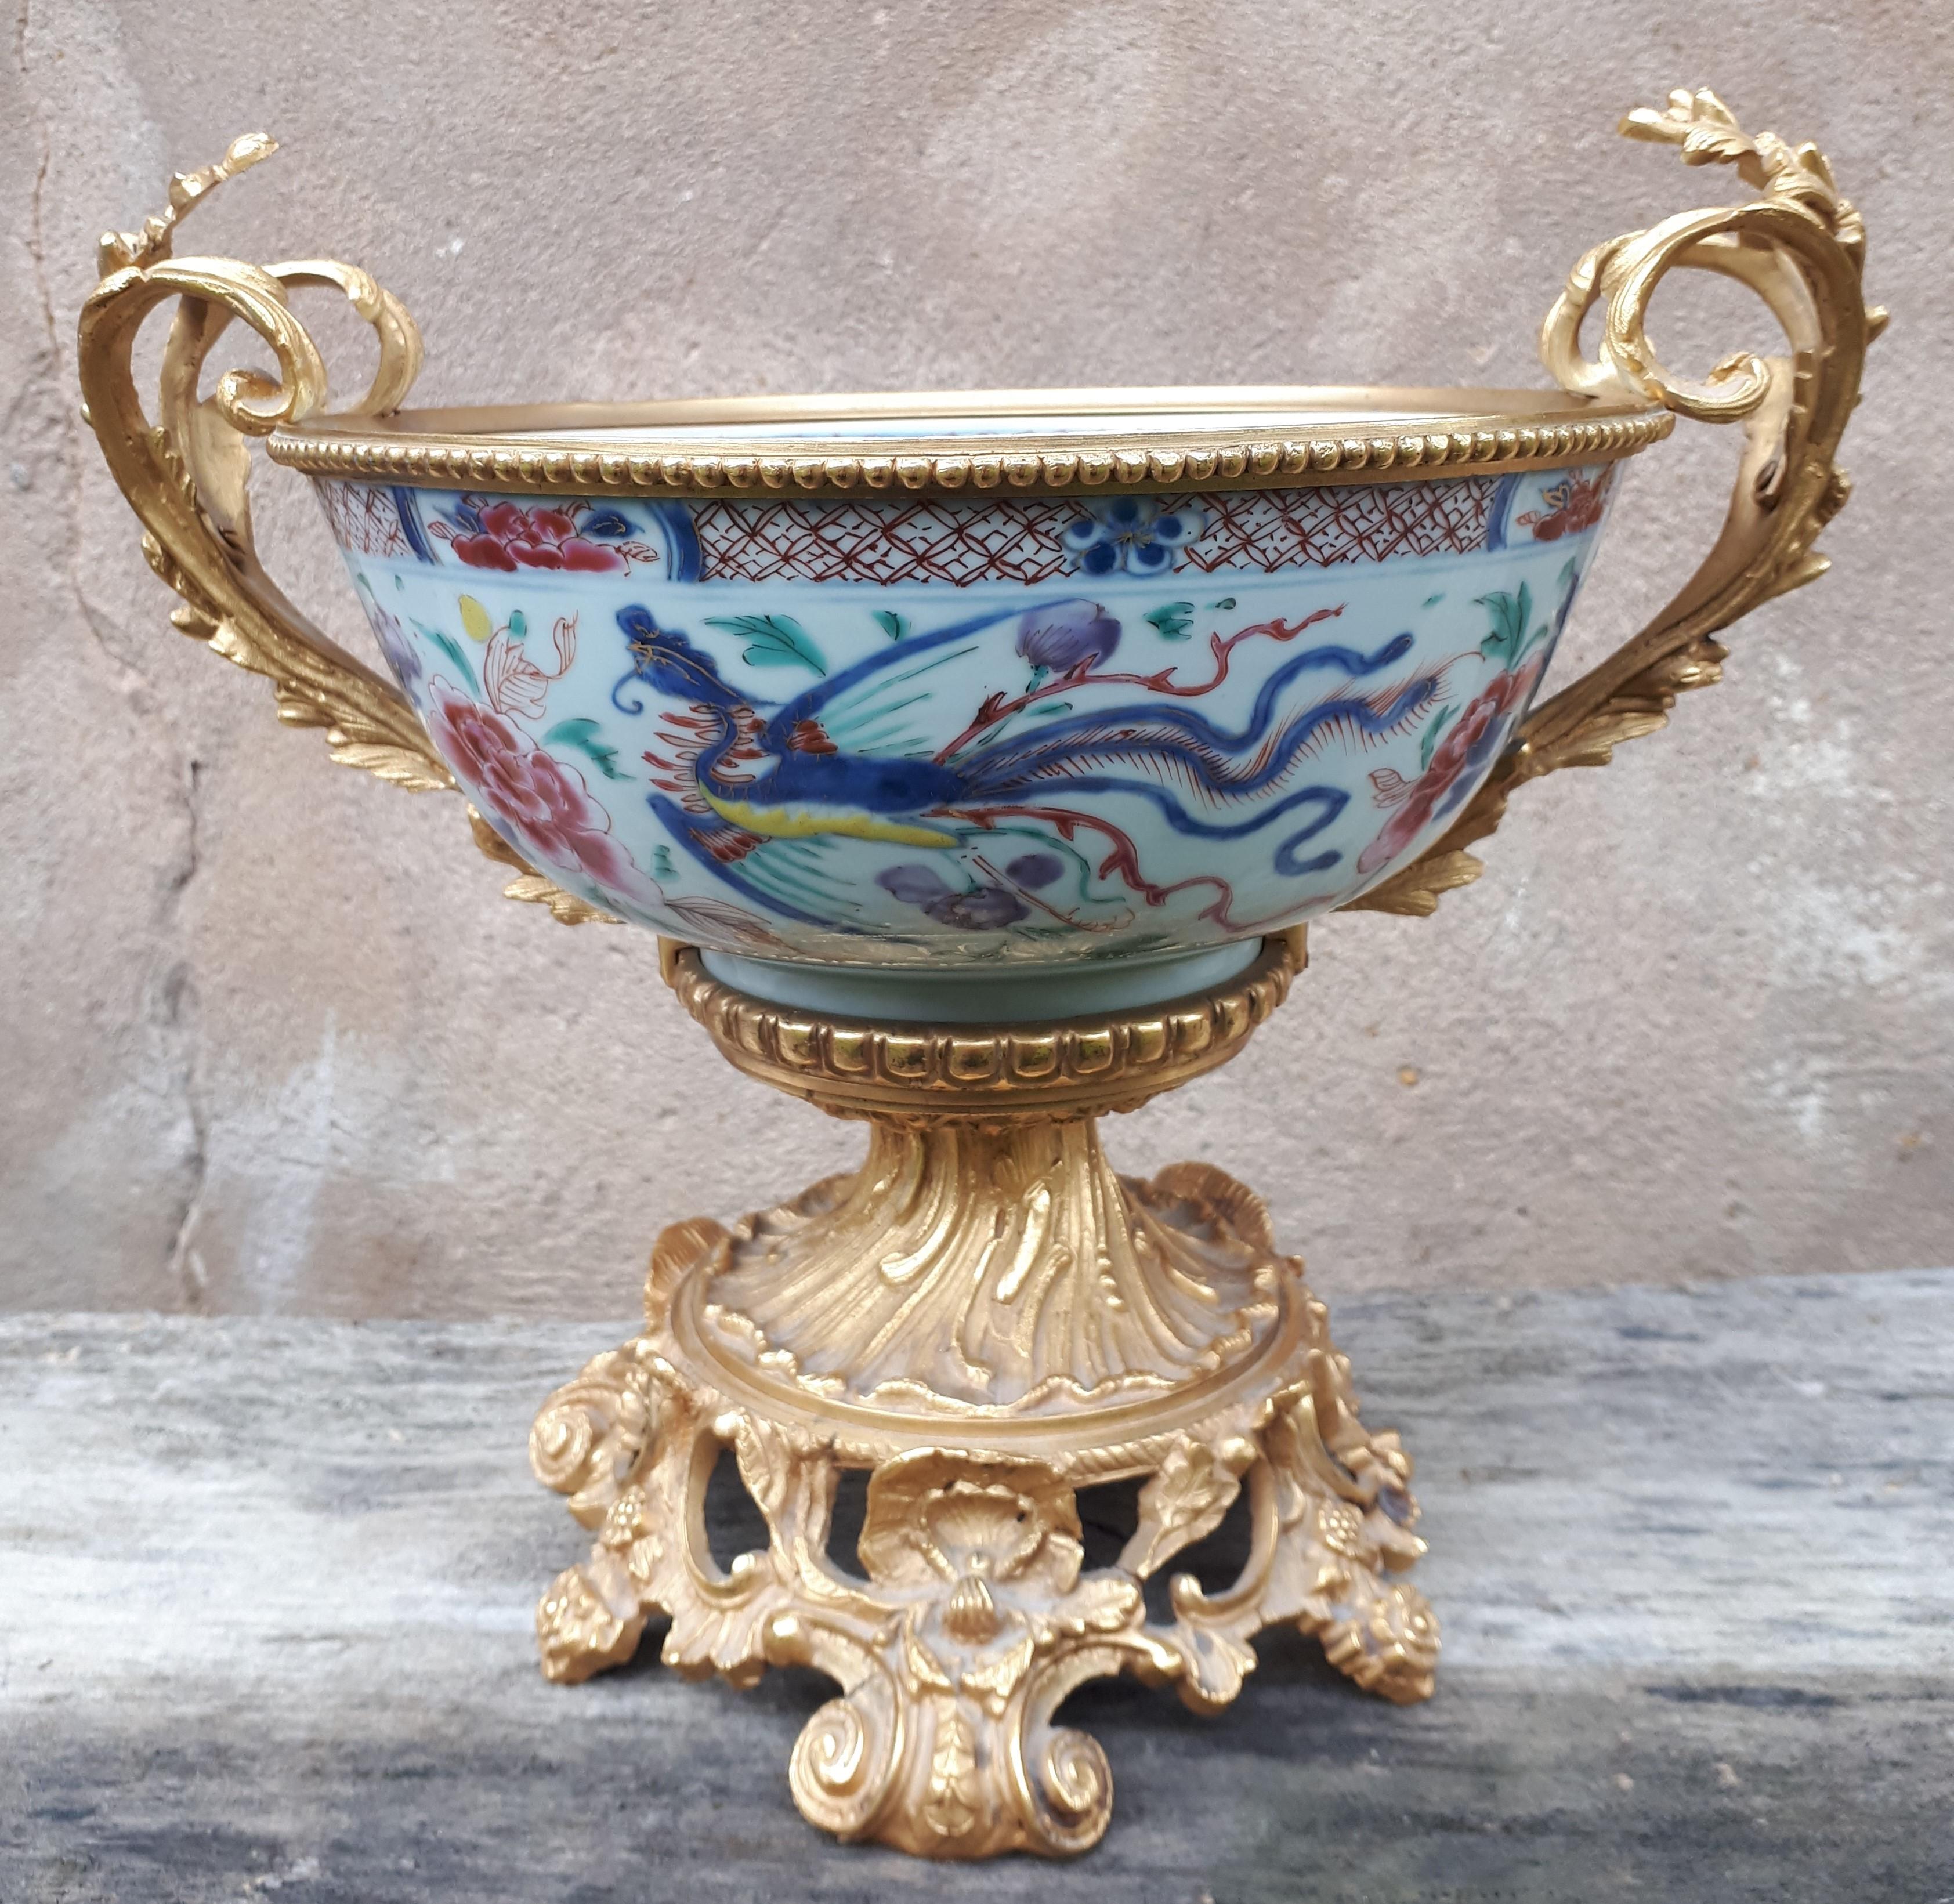 Porcelain cup with Famille Rose enamels decorated with phoenix.
The cup, Chinese from the Yongzheng period, was very early mounted in bronze in France, explaining its perfect state of conservation.
The marriage of Chinese and French know-how is just